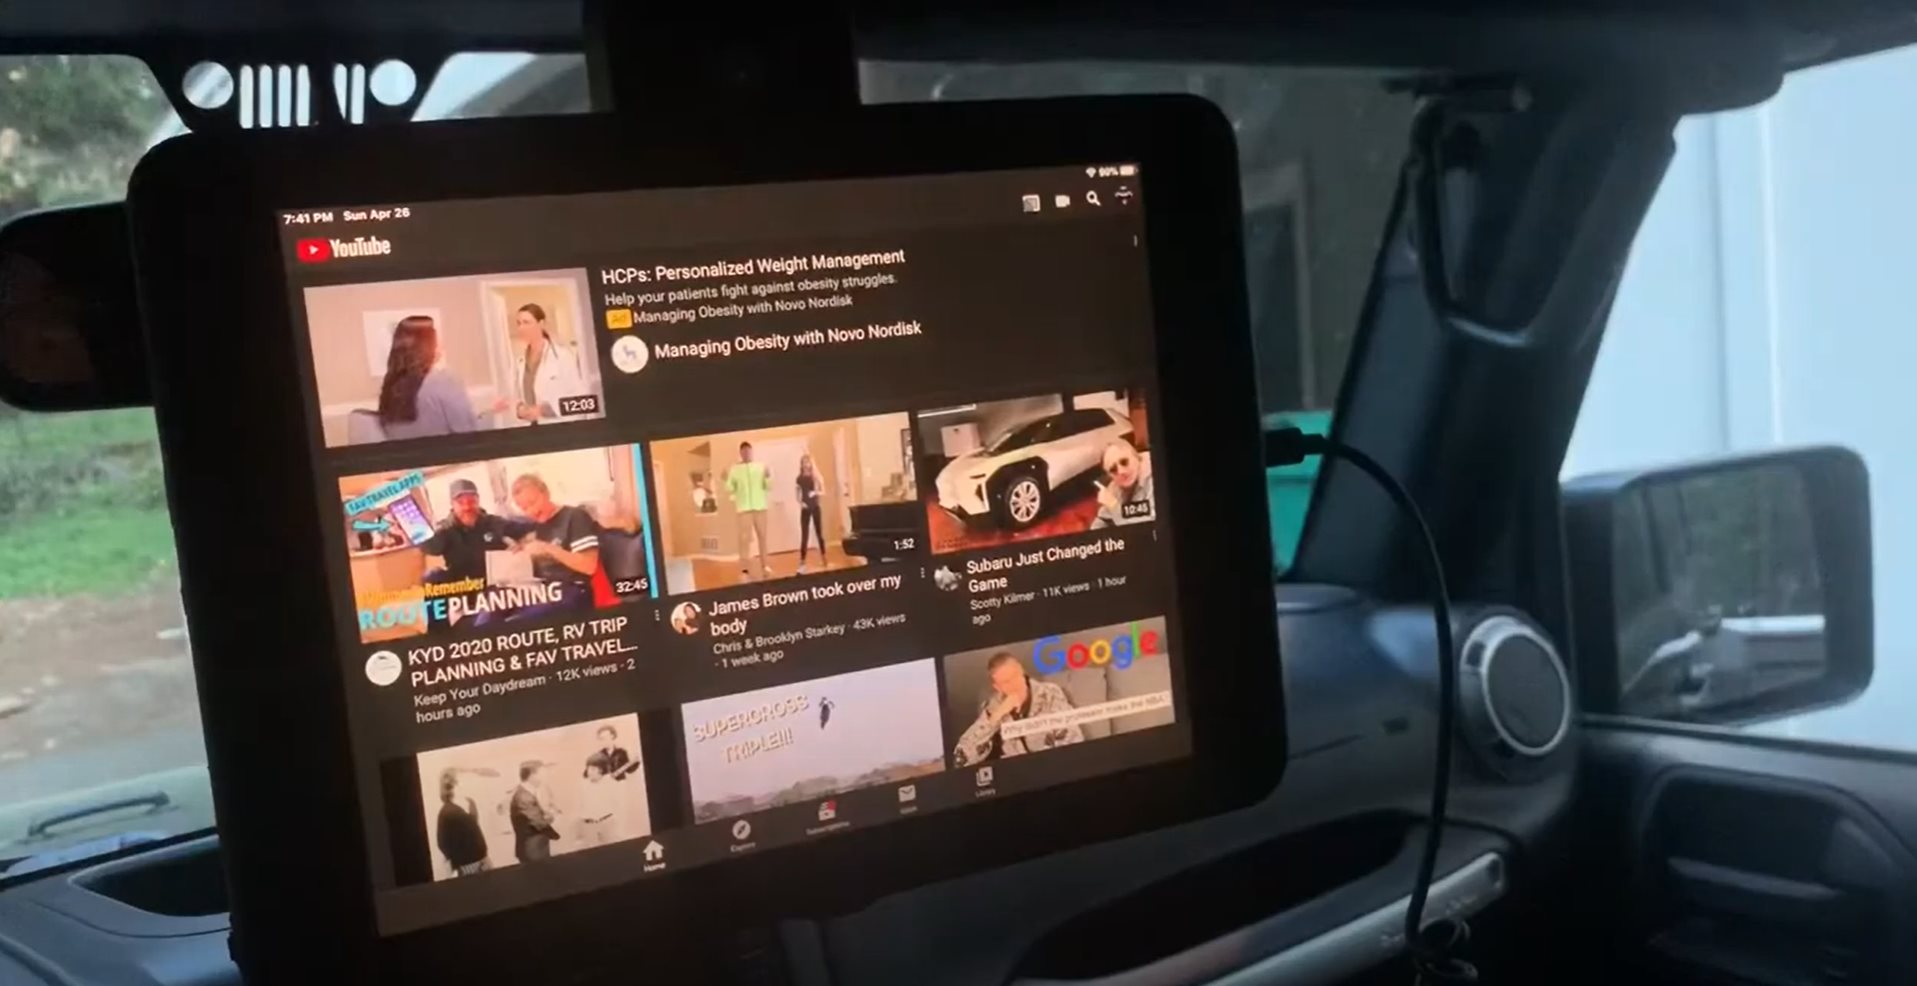 This Jeep Wrangler Gets Rid of the Cluttered Dashboard with a Folding iPad  - autoevolution